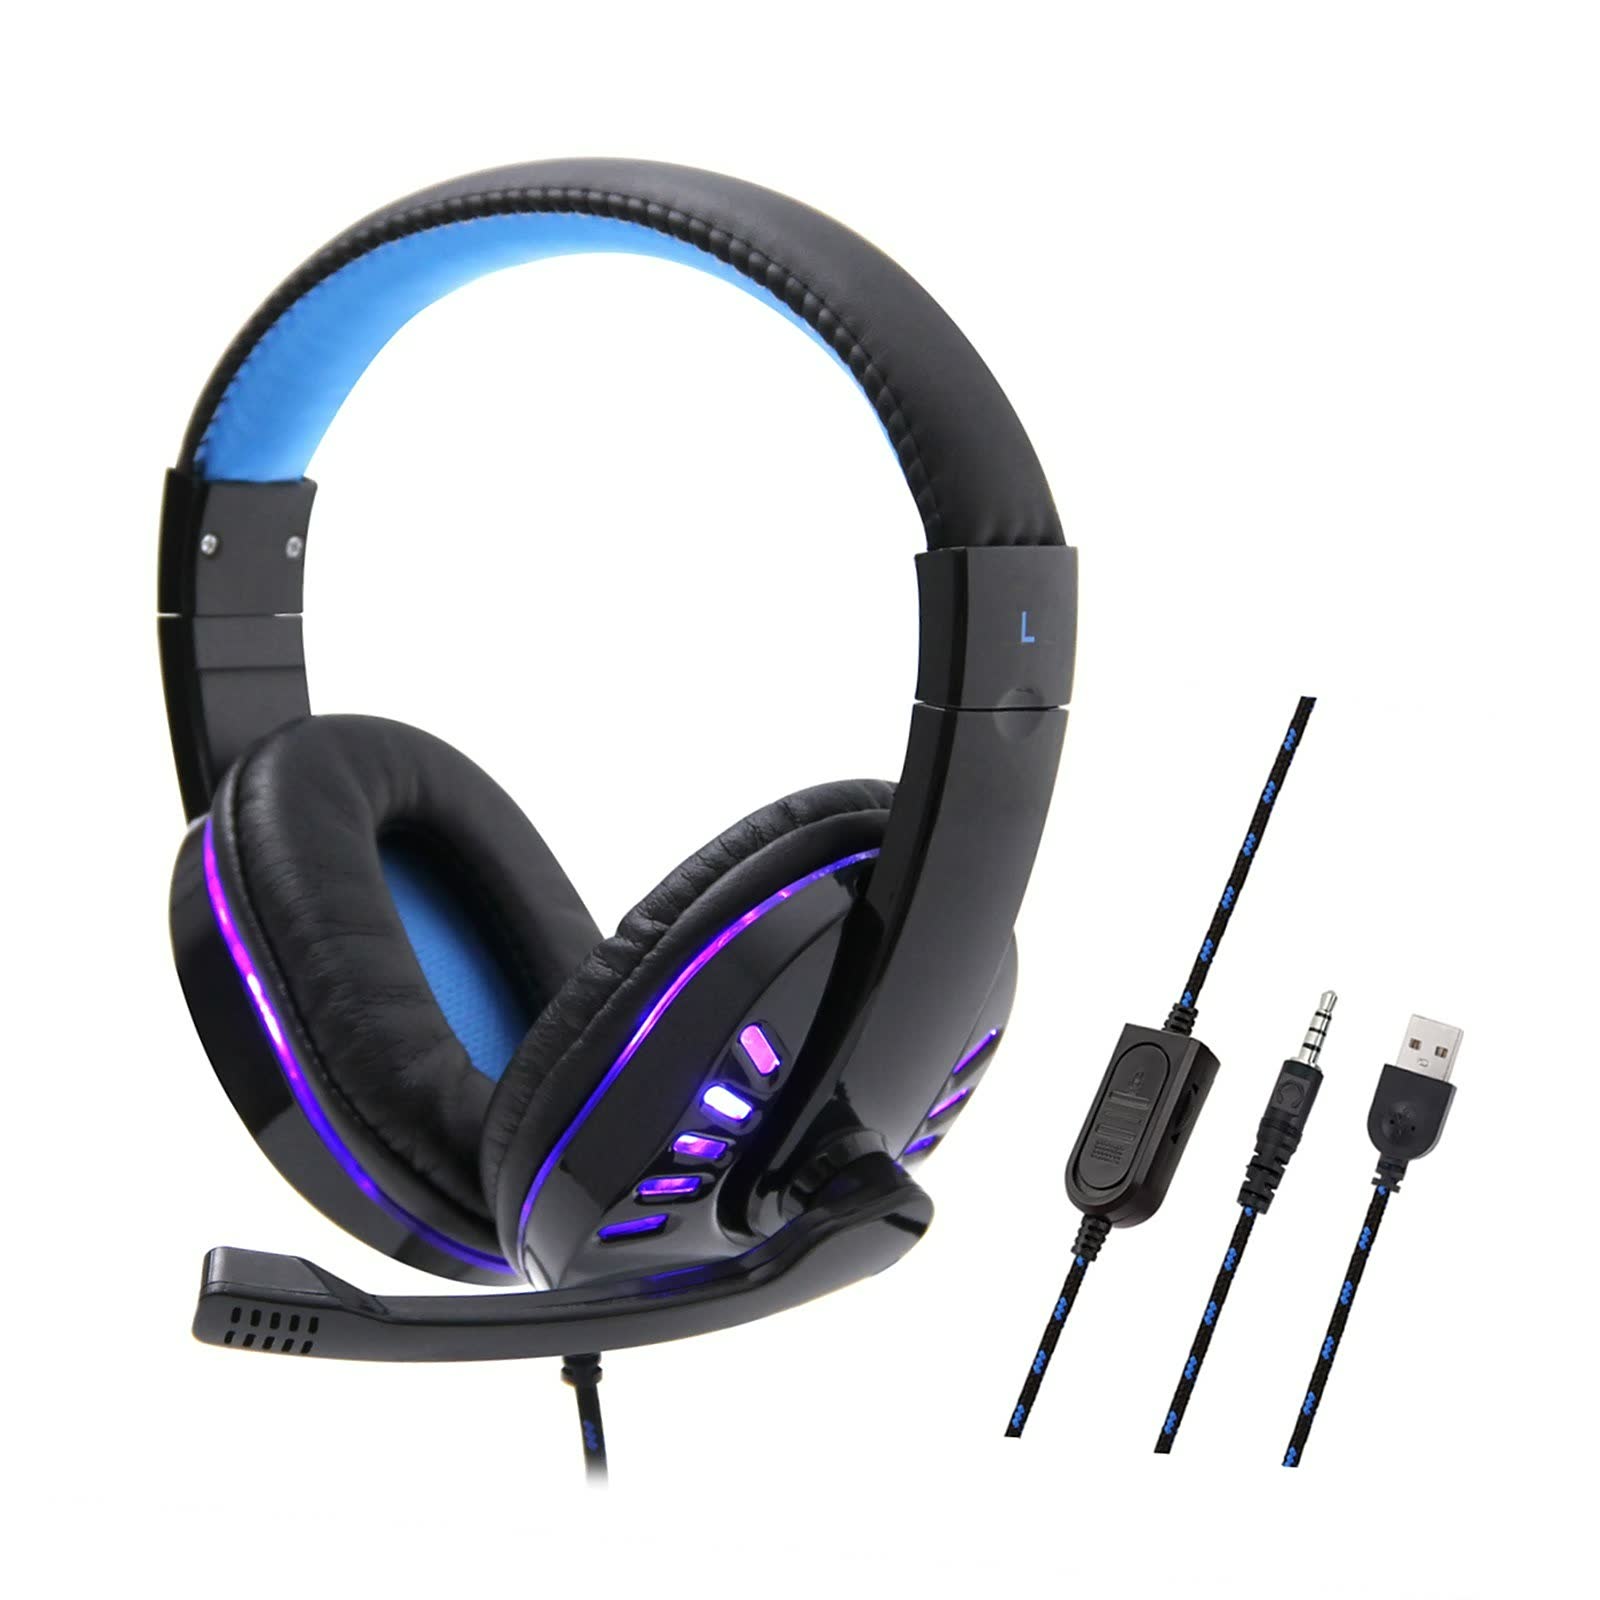 SY755MV Luminous Game Headphone Over-ear Gaming Headset With Microphone PC Gamer 3.5mm Headphones Noise Cancelling Compatible With PS4 Xbox Laptop Compute